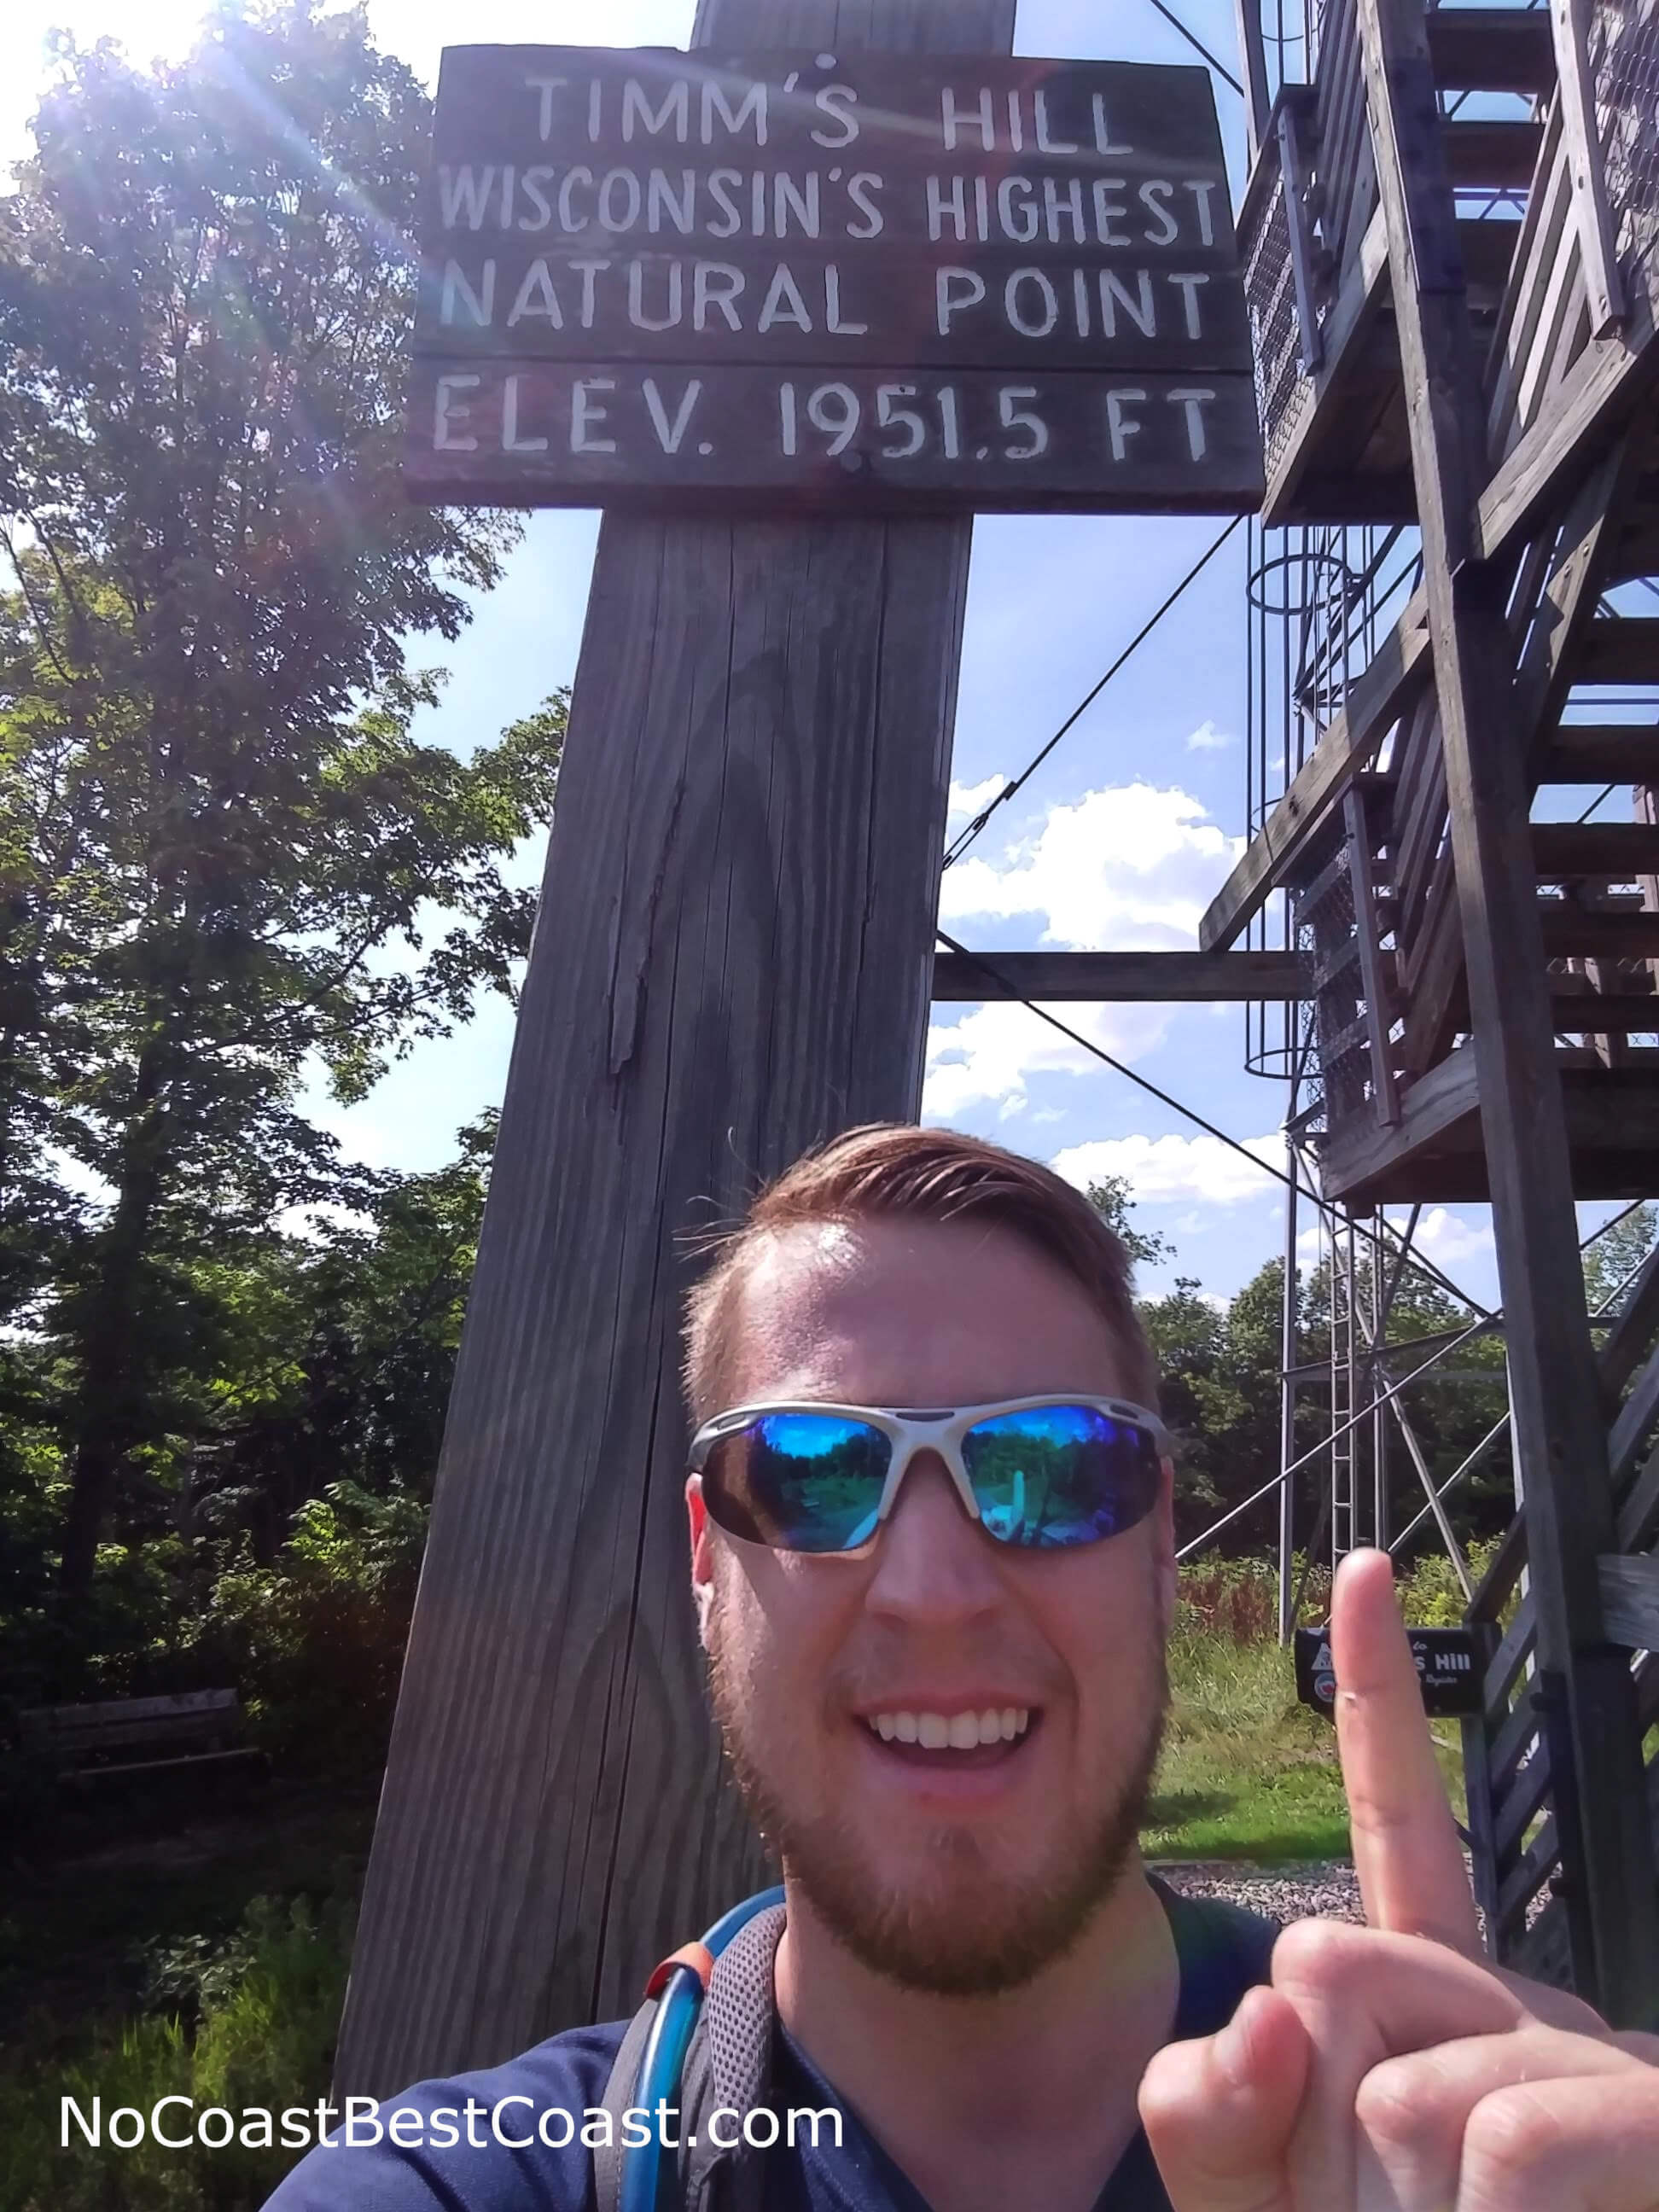 The sign on the observation tower marking the highest elevation in Wisconsin